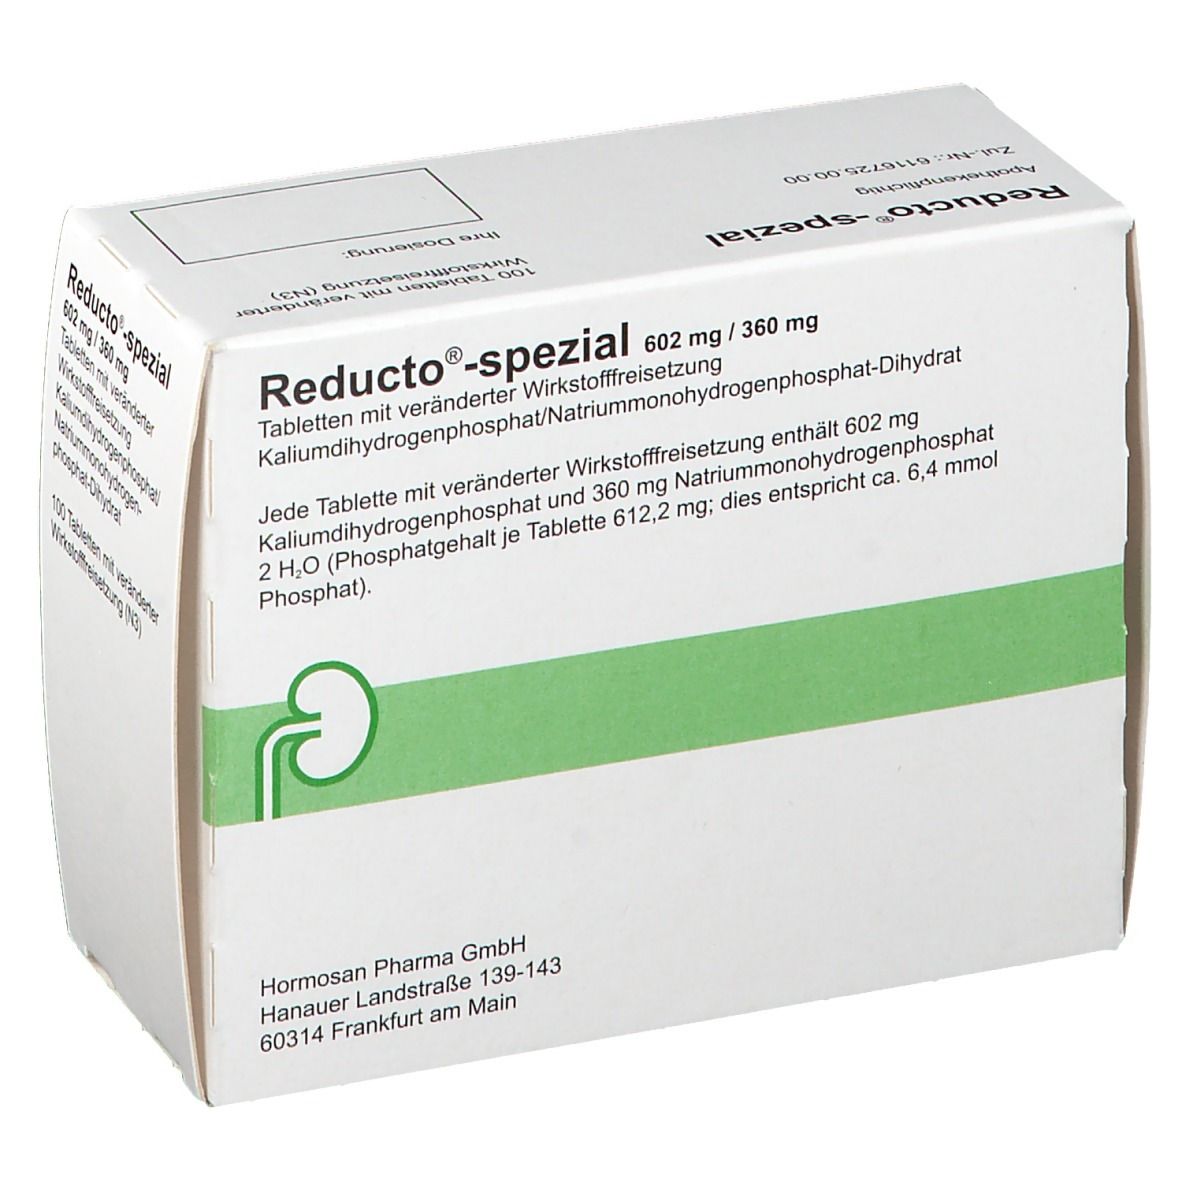 Reducto®-spezial 602 mg / 360 mg Dragees